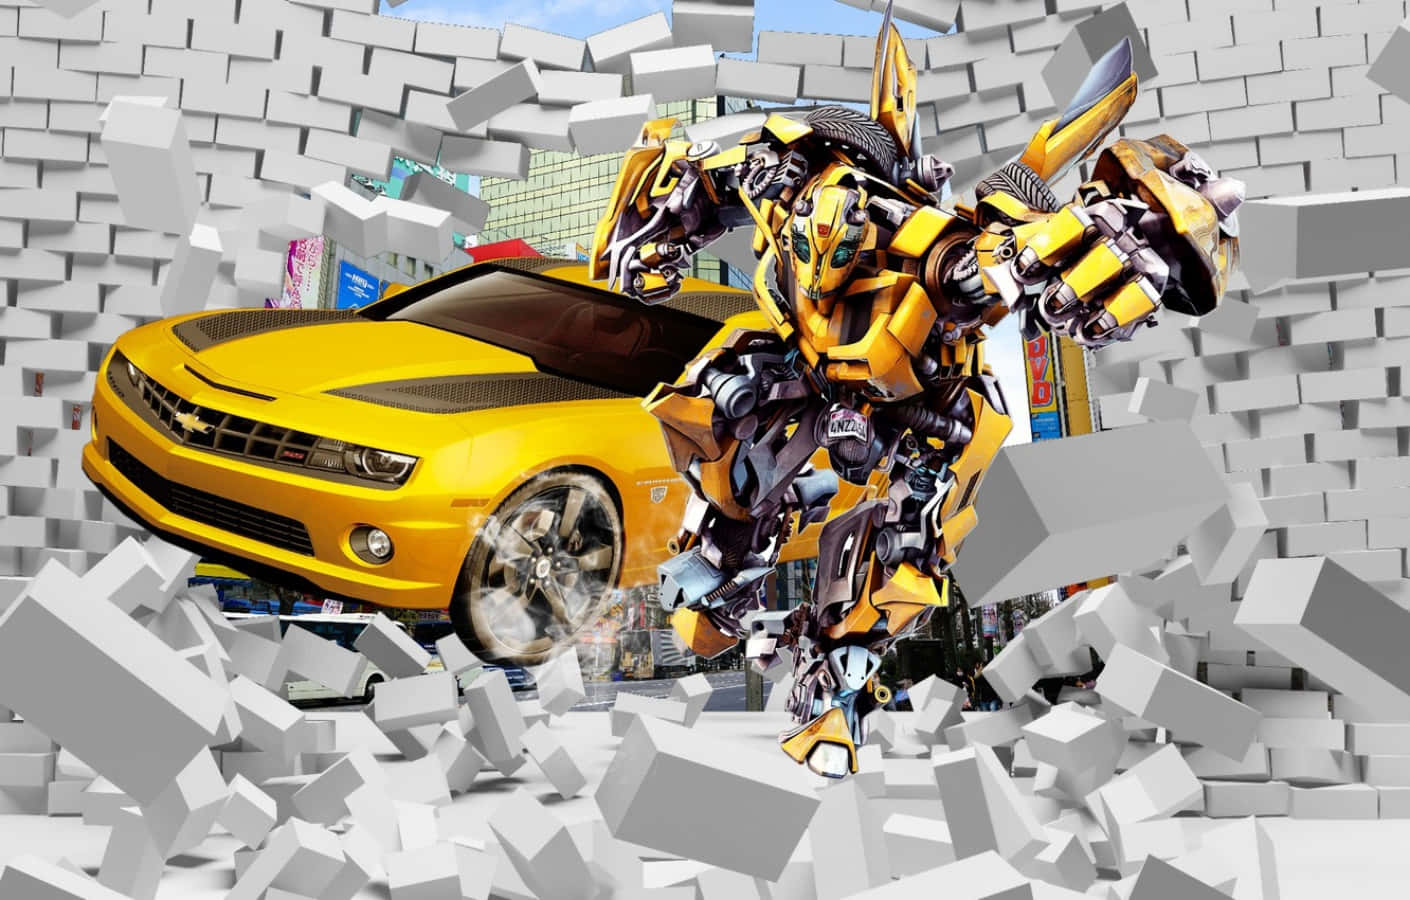 A view of the iconic Bumblebee - the star of the Transformers franchise